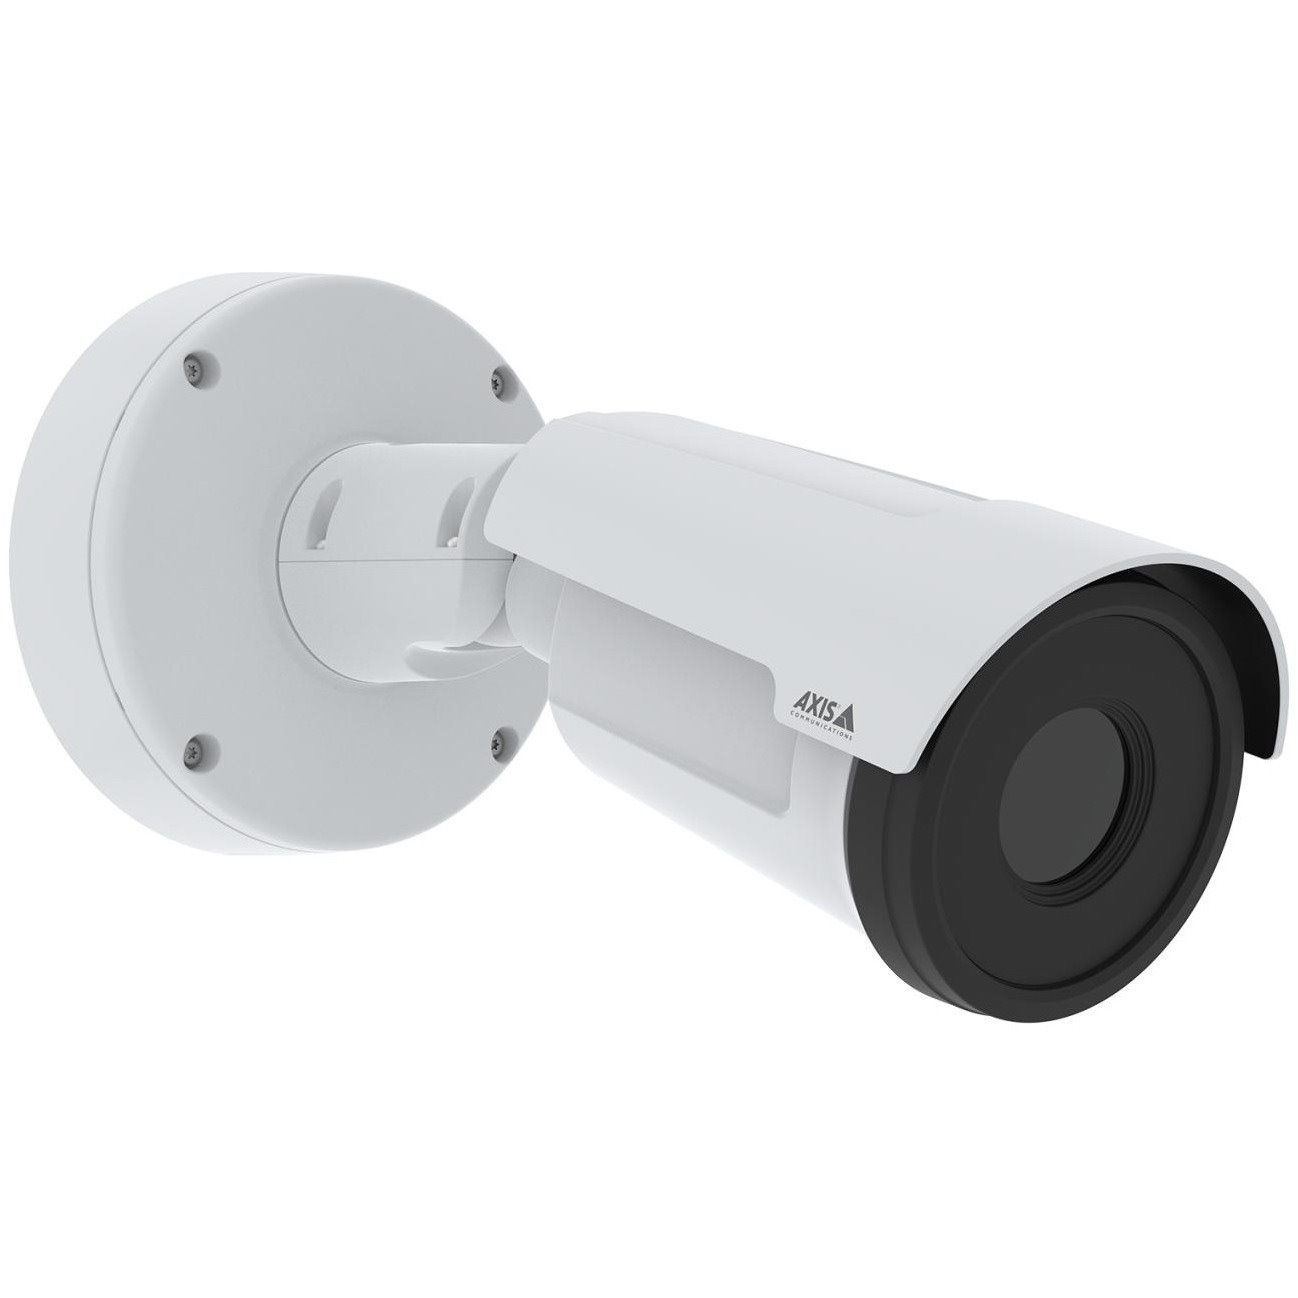 AXIS Q1961-TE Outdoor Network Camera - White - TAA Compliant